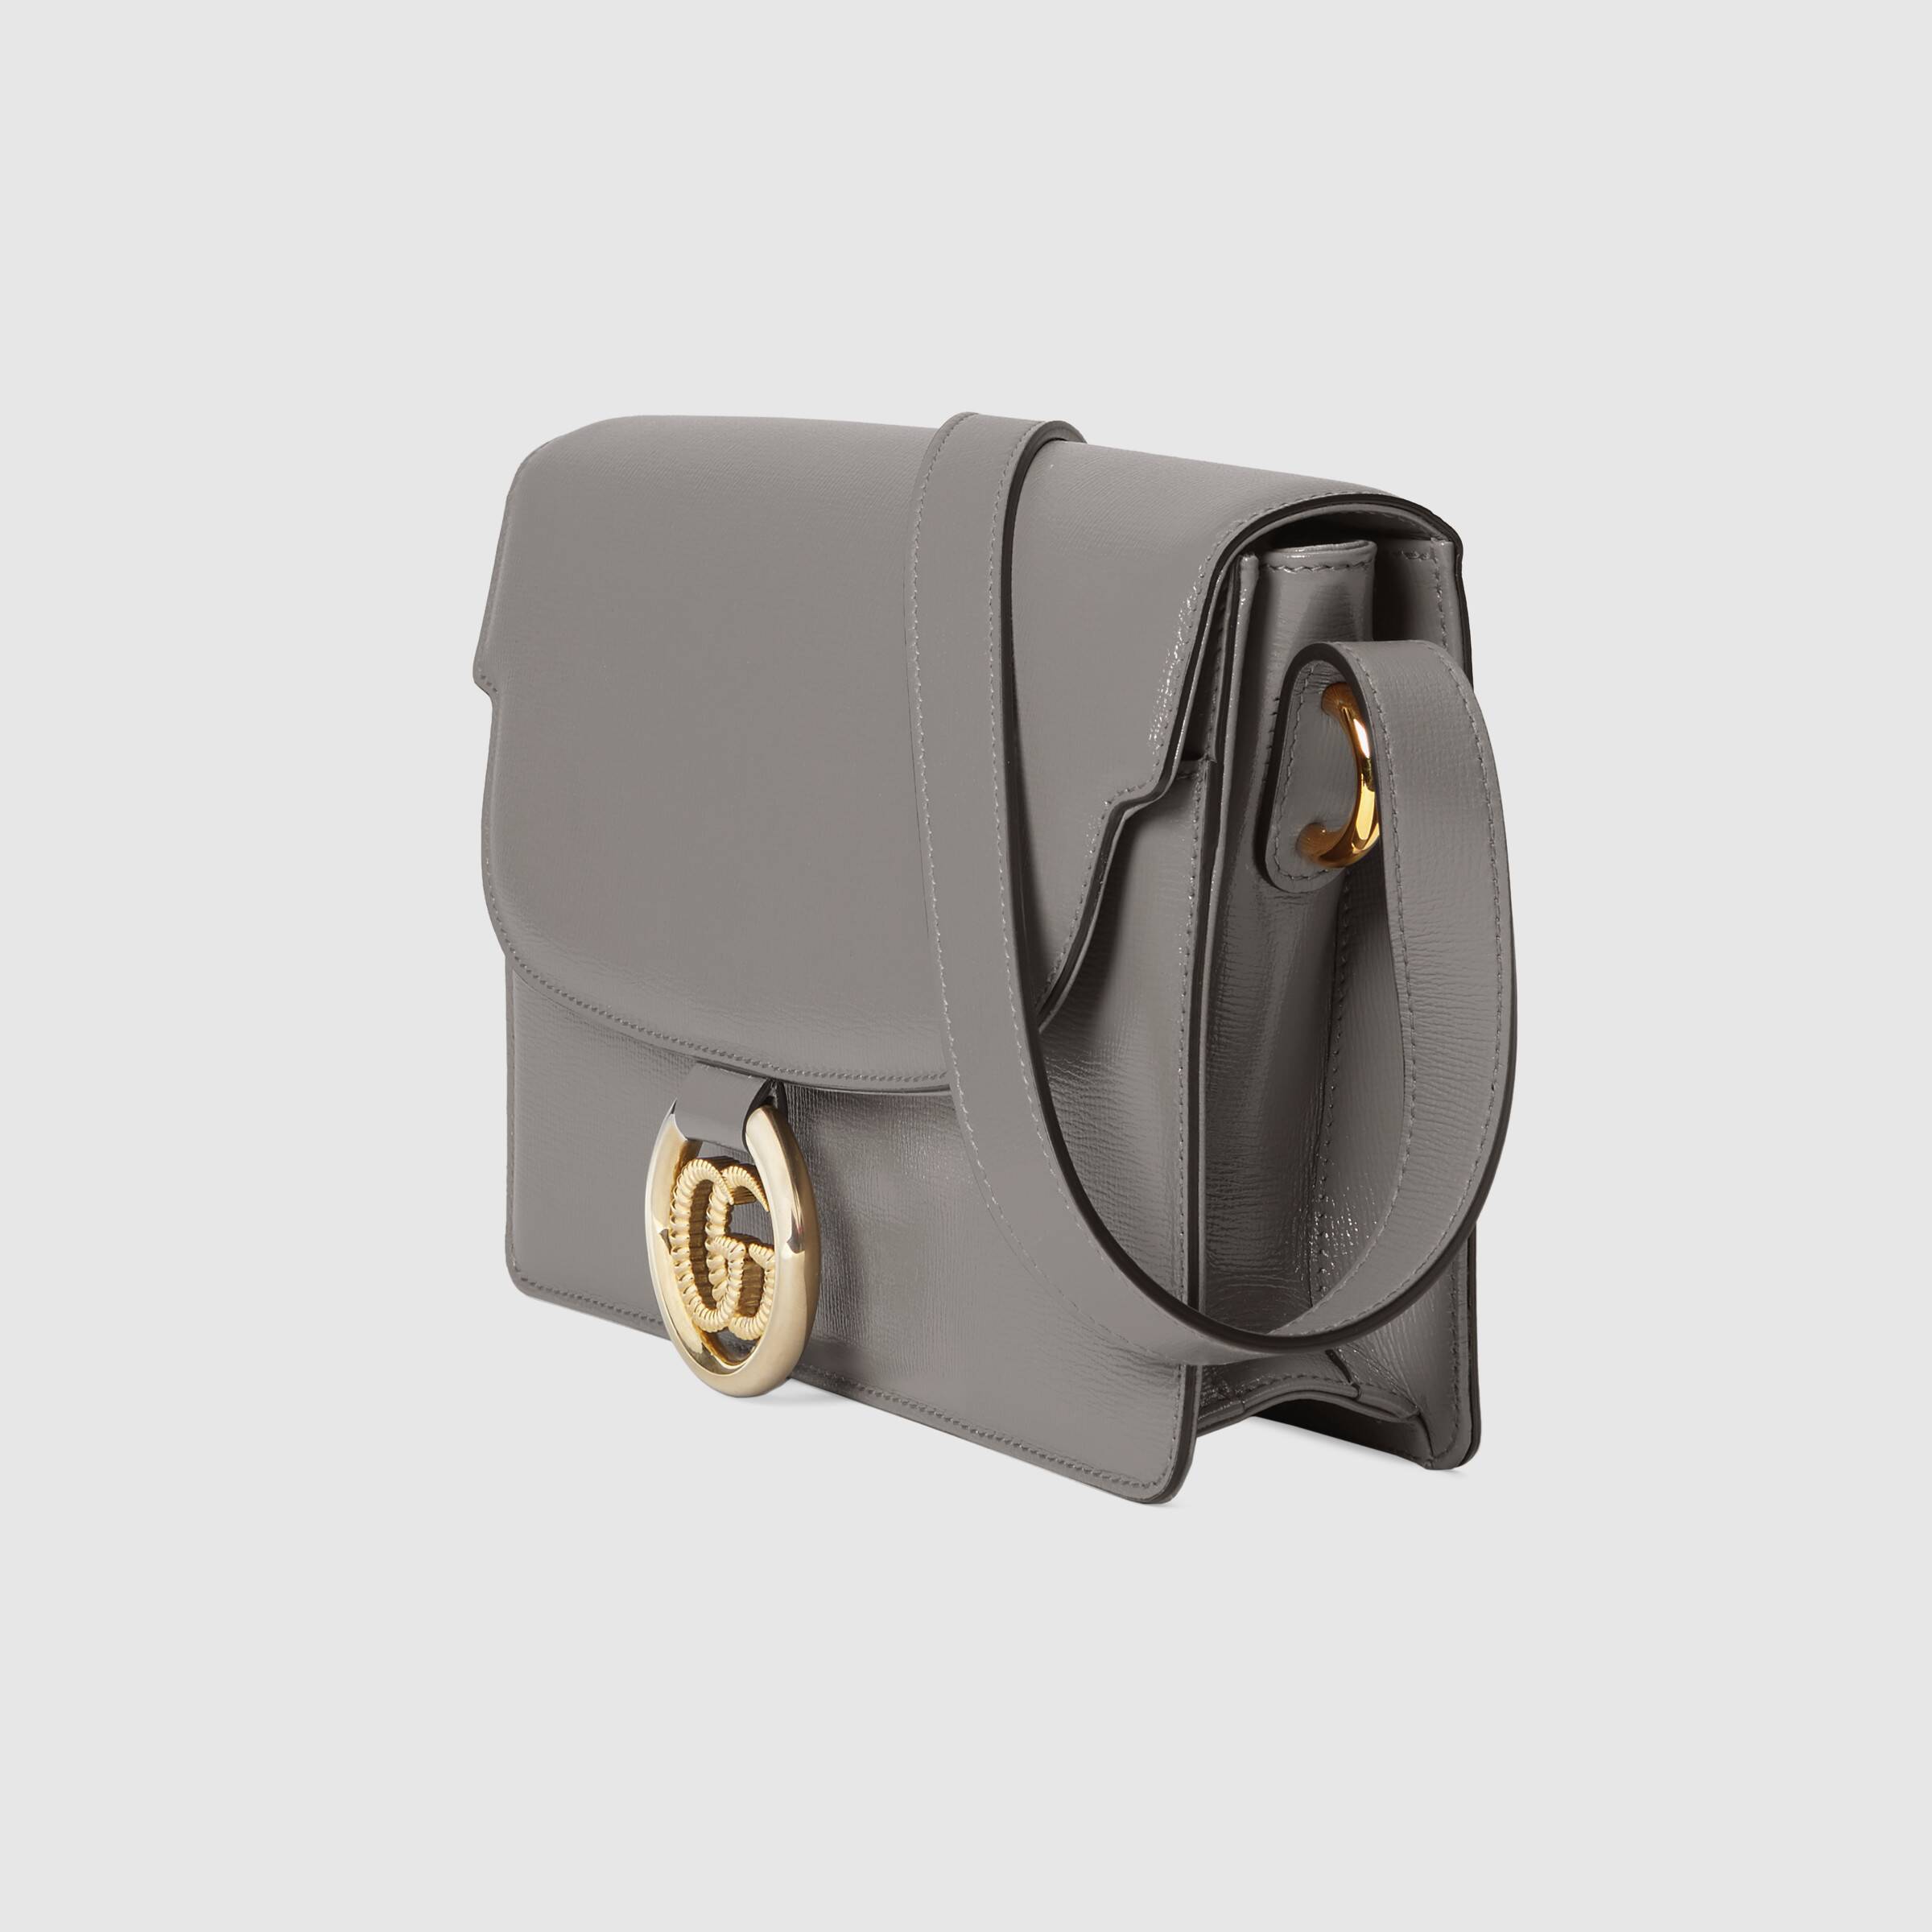 Gucci Small Leather Shoulder Bag Dusty Grey